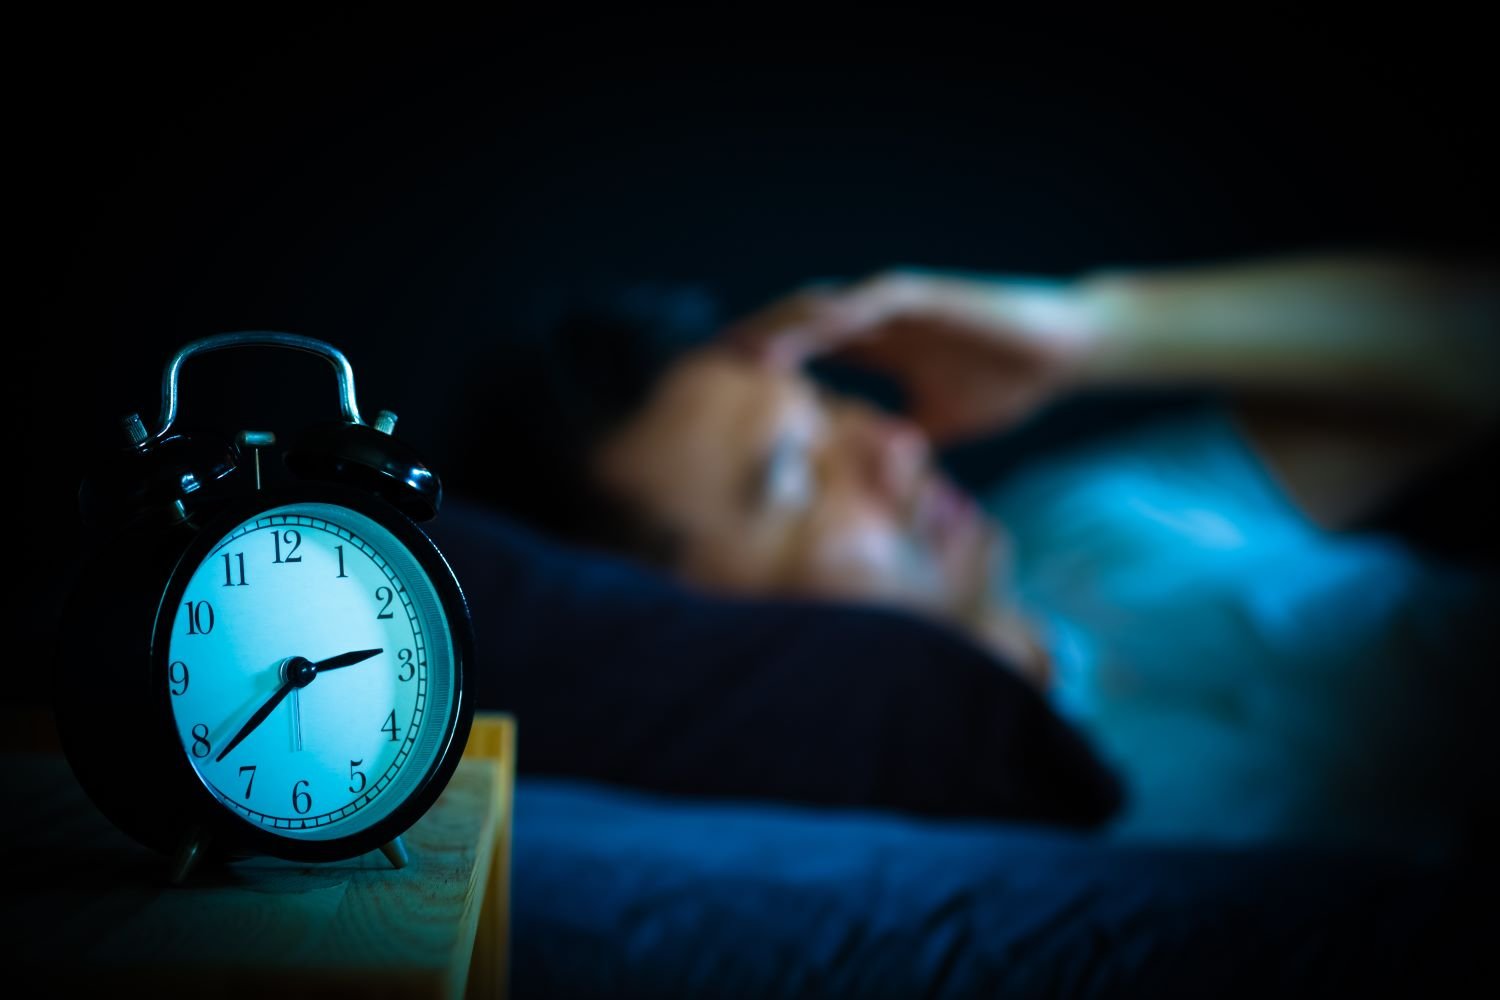 Difficulty sleeping can be caused by many factors, issues, and conditions. Here are just a few of the possible causes of insomnia.